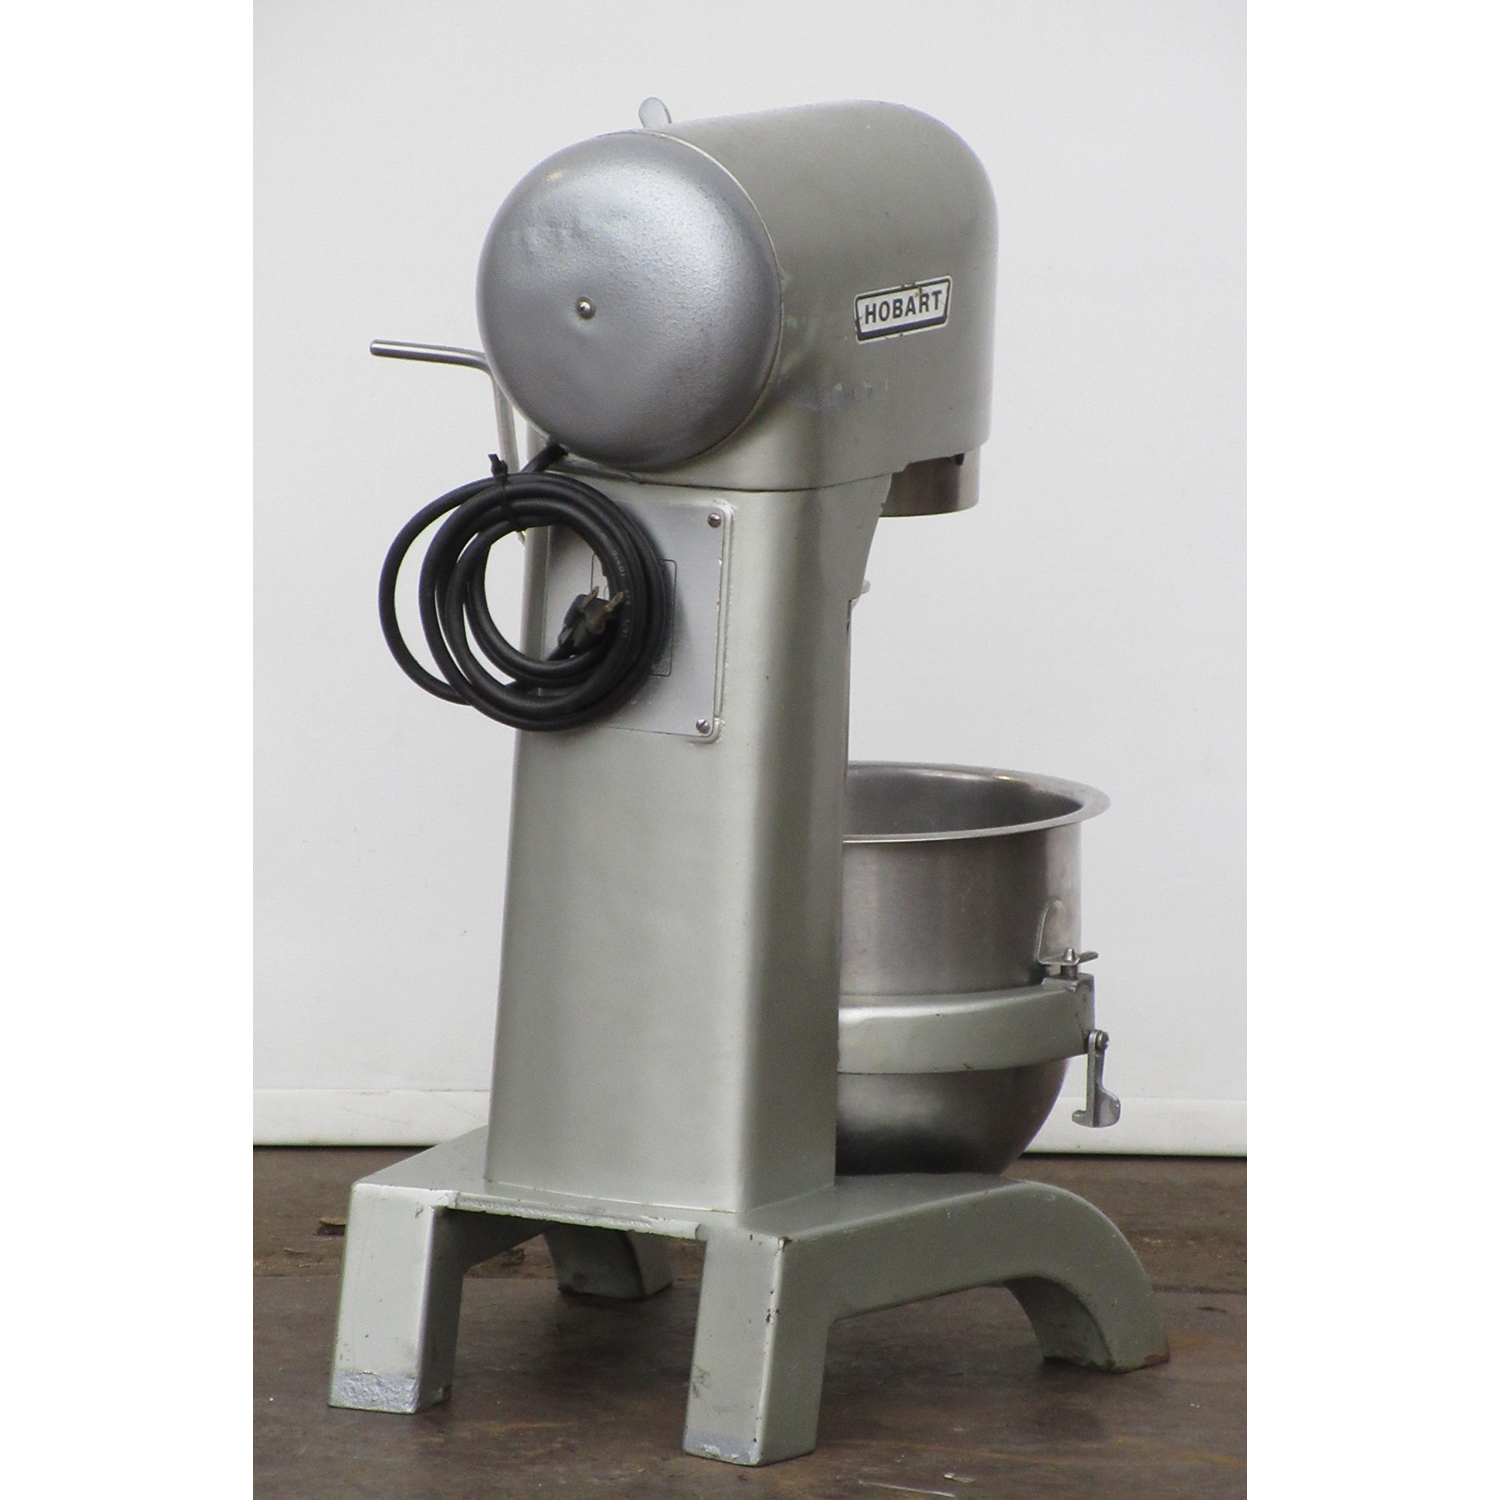 Hobart C100T Mixer 10 Qt, Used Excellent Condition image 2